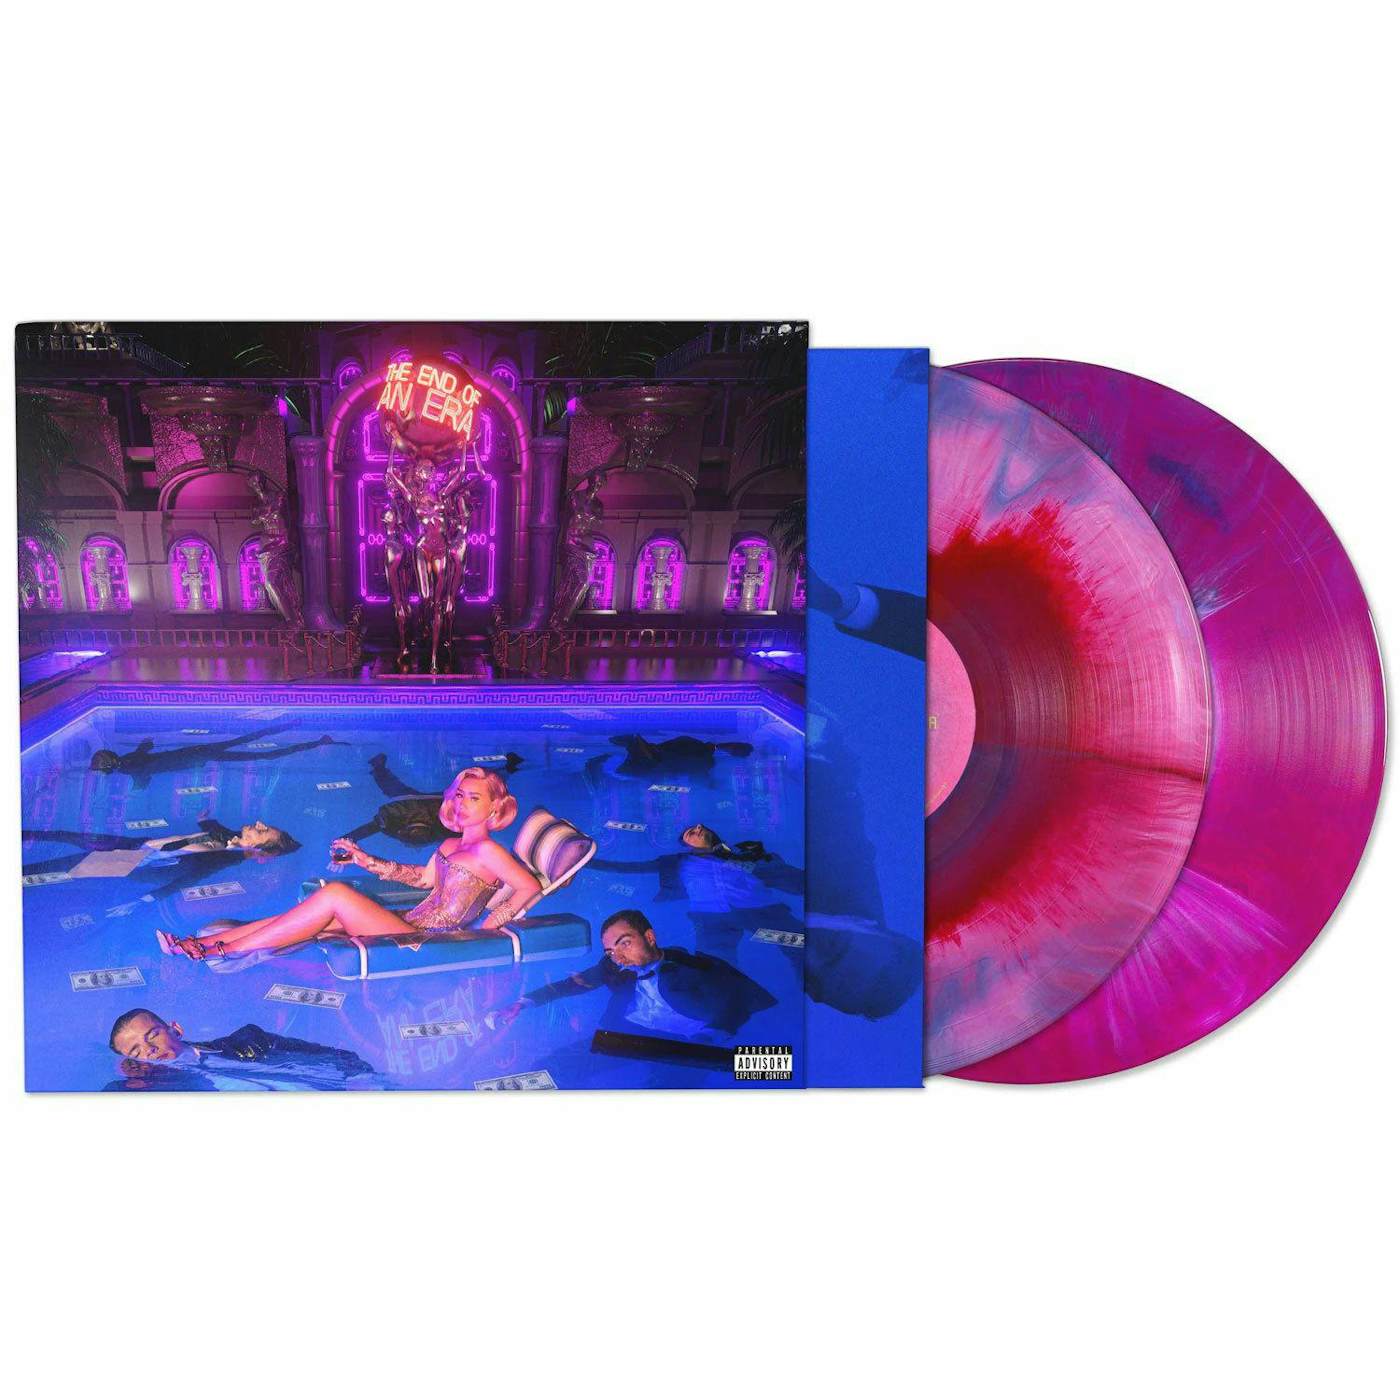 Iggy Azalea The End of an Era (Deluxe - Red, Blue, and Purple) 2LP (Vinyl)